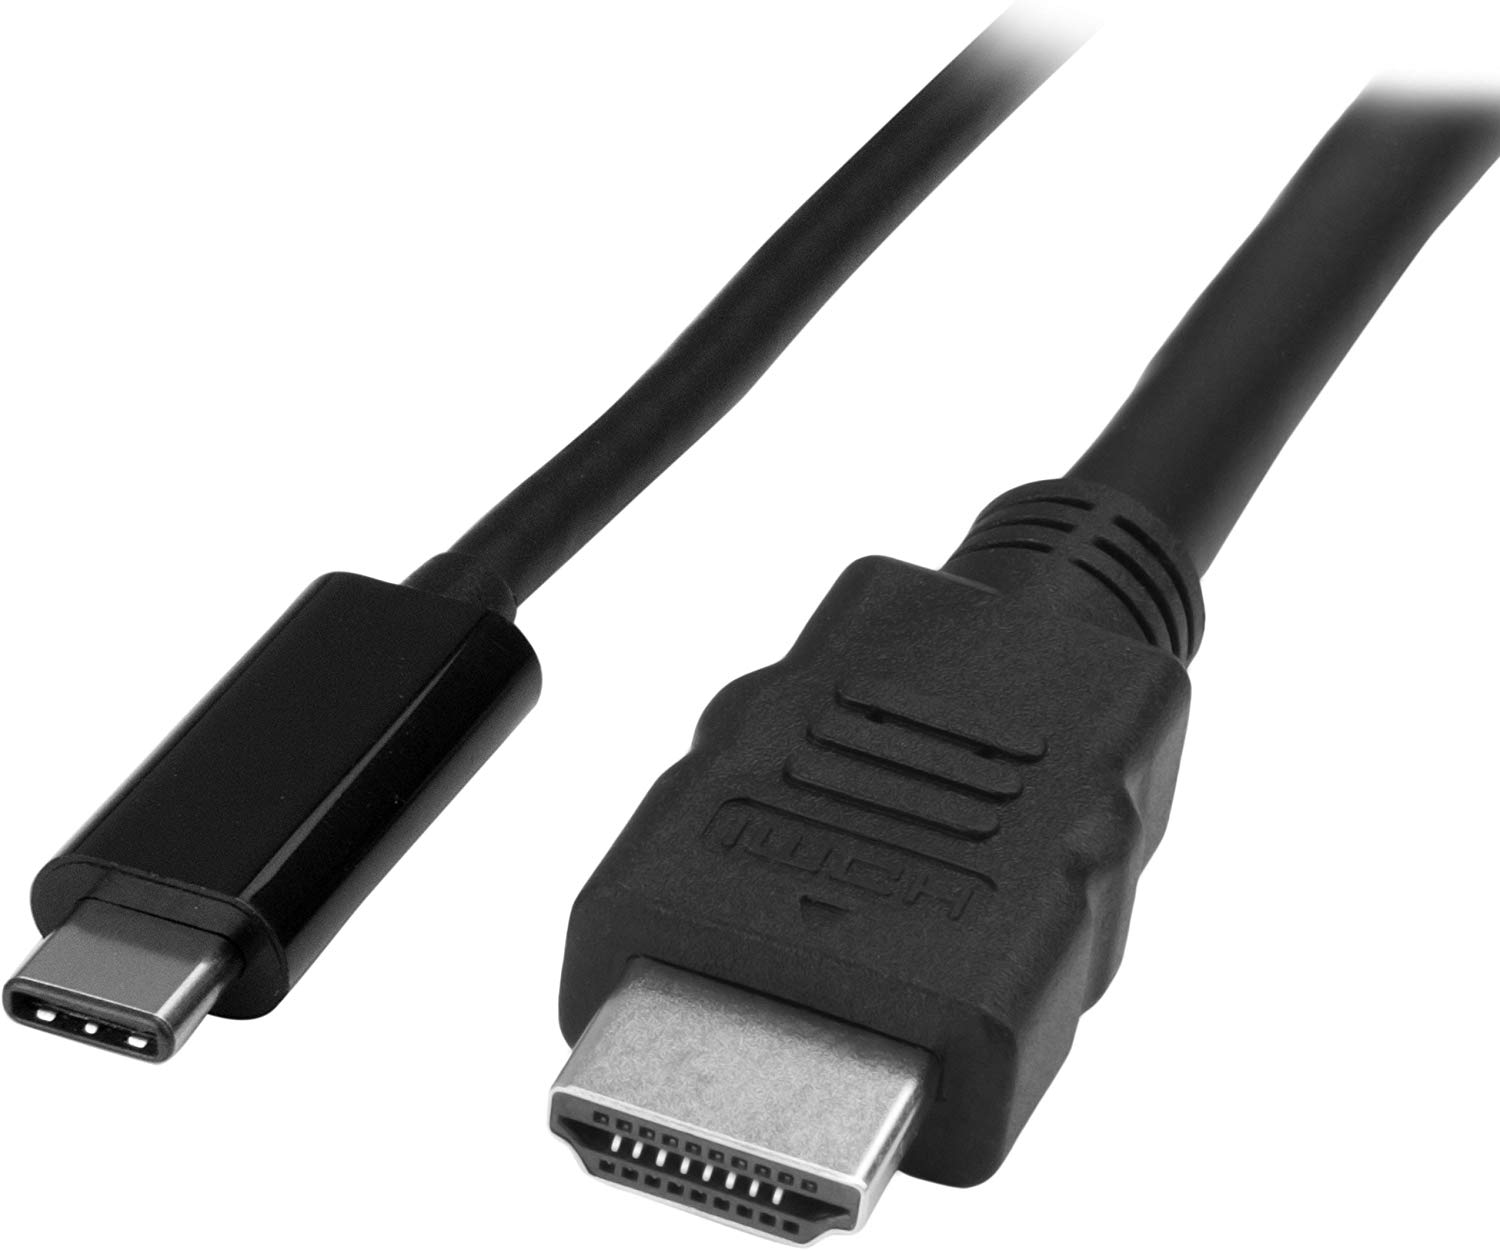 UCHI-5: USB Type-C to HDMI Adapter Cable 5ft M/M